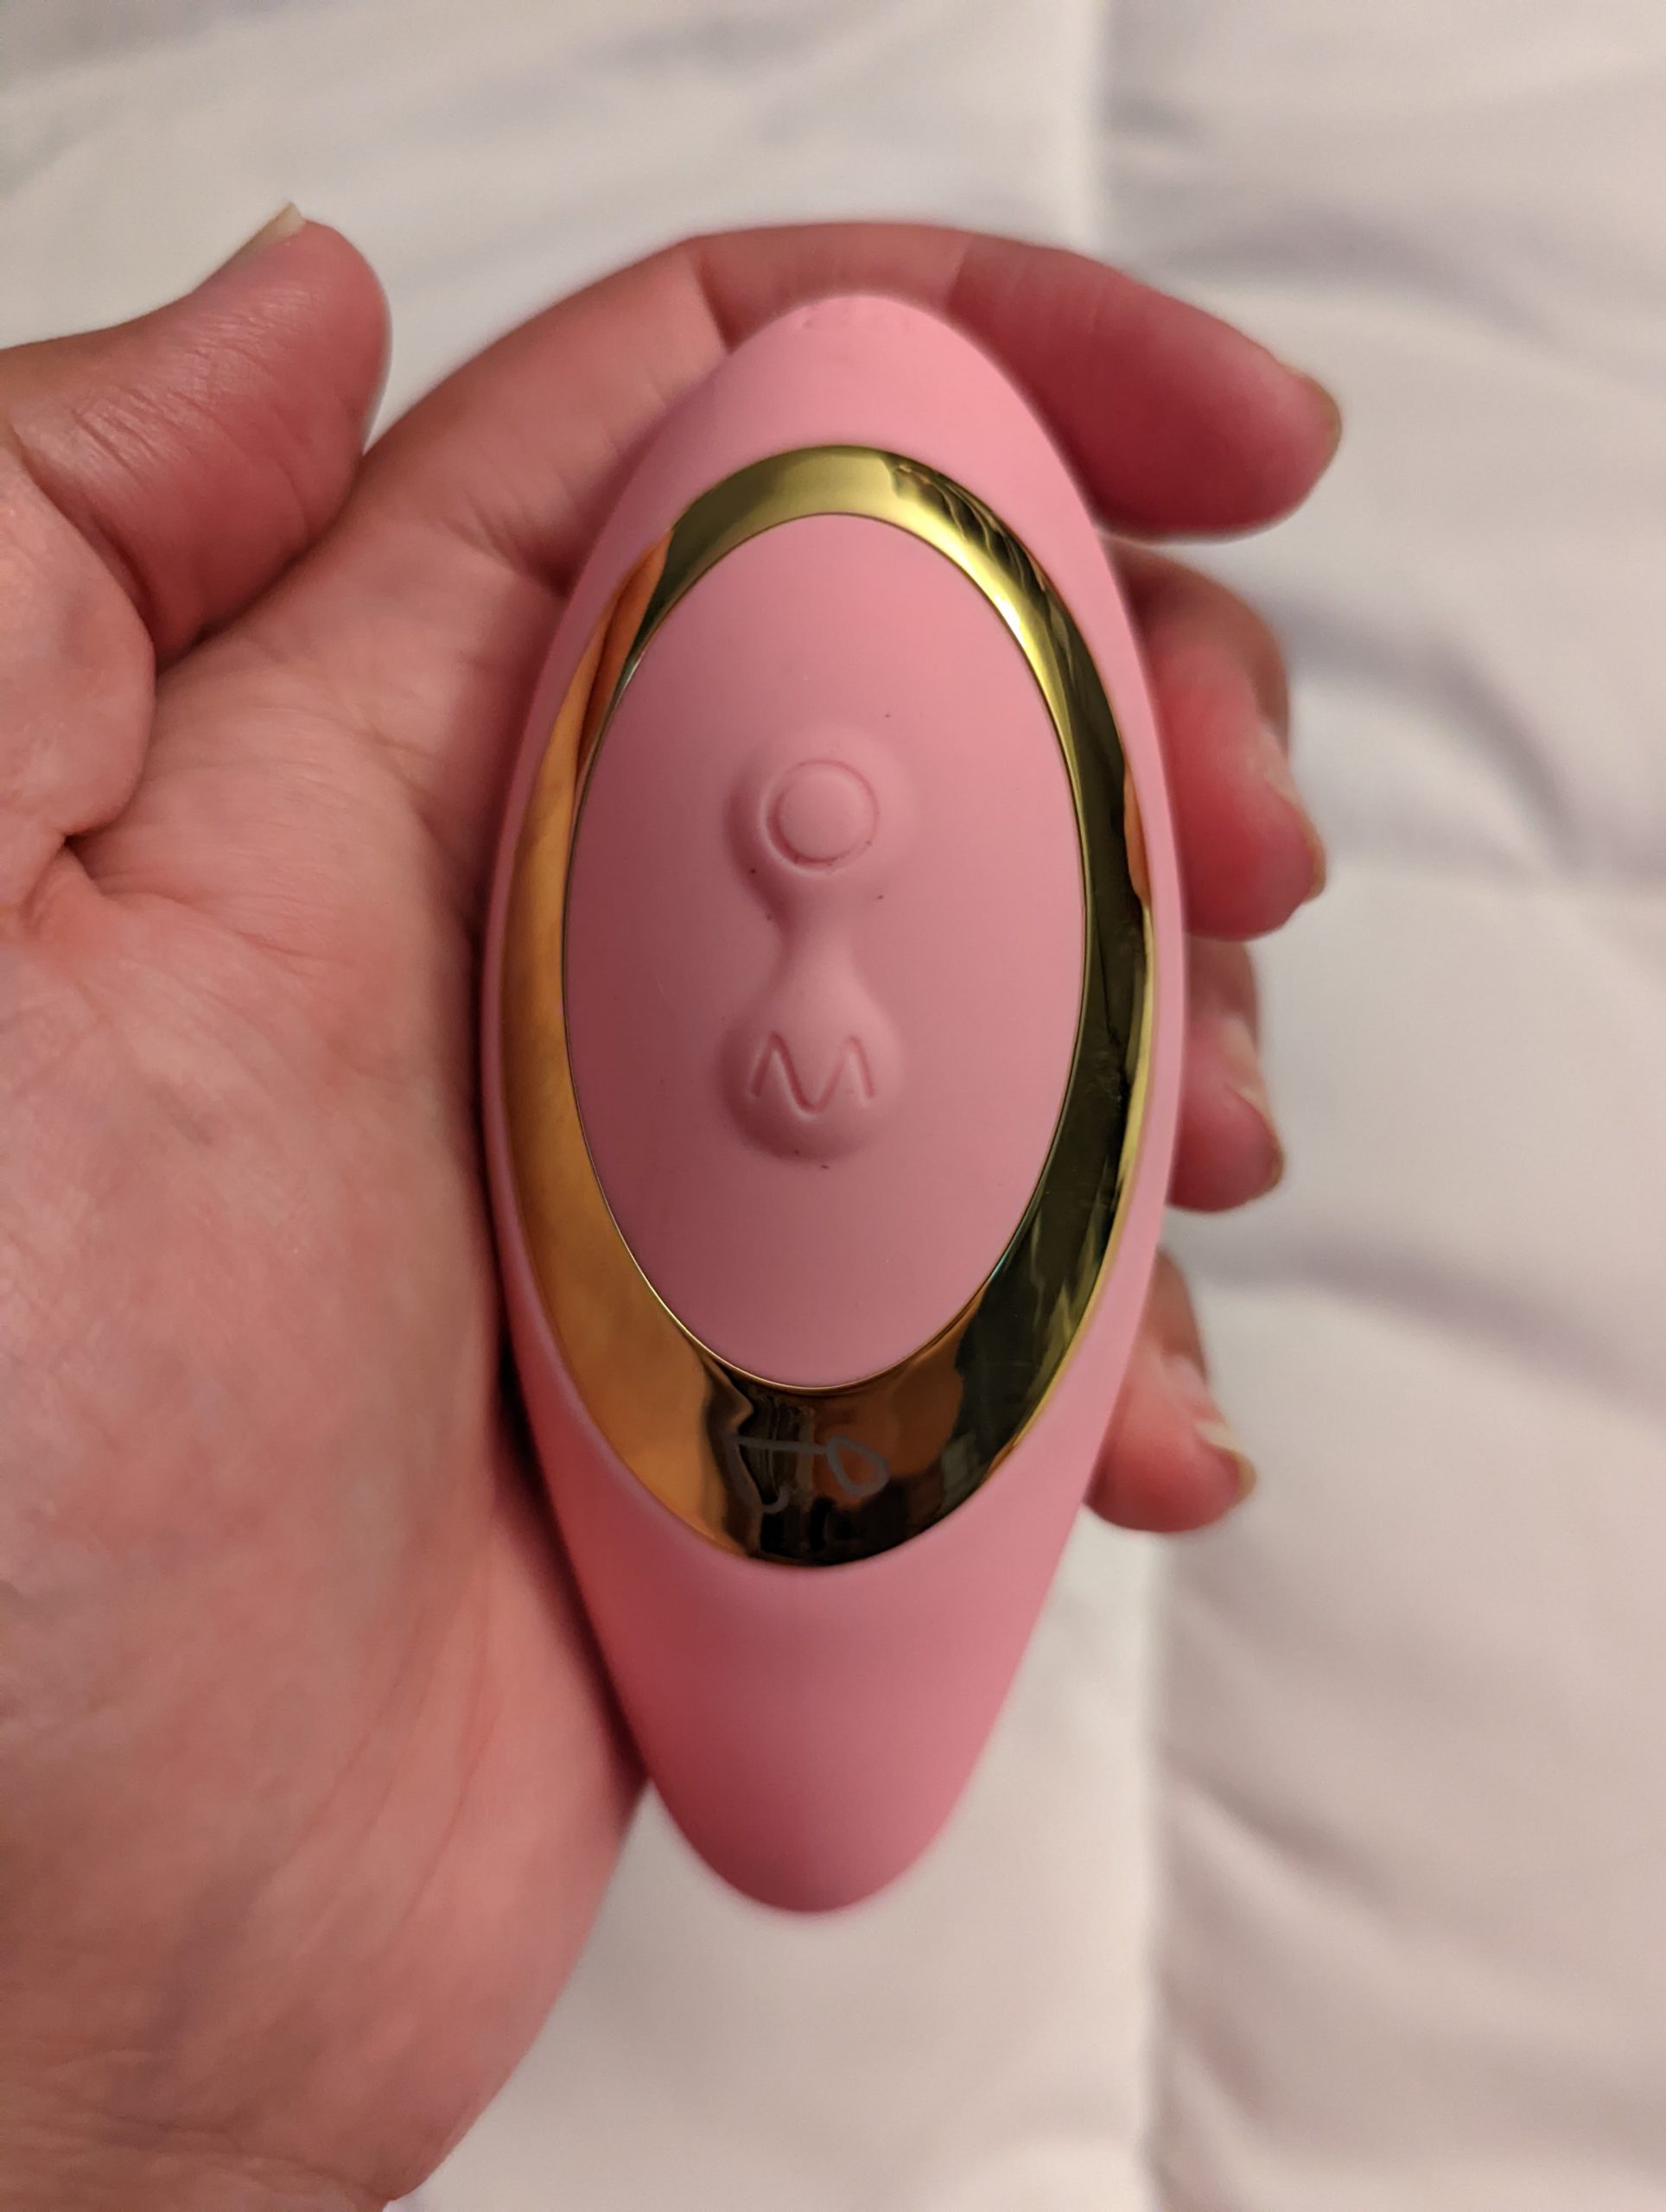 I was selected as a product tester for a Tracy's Dog toy! Review in  comments. : r/TracysDog